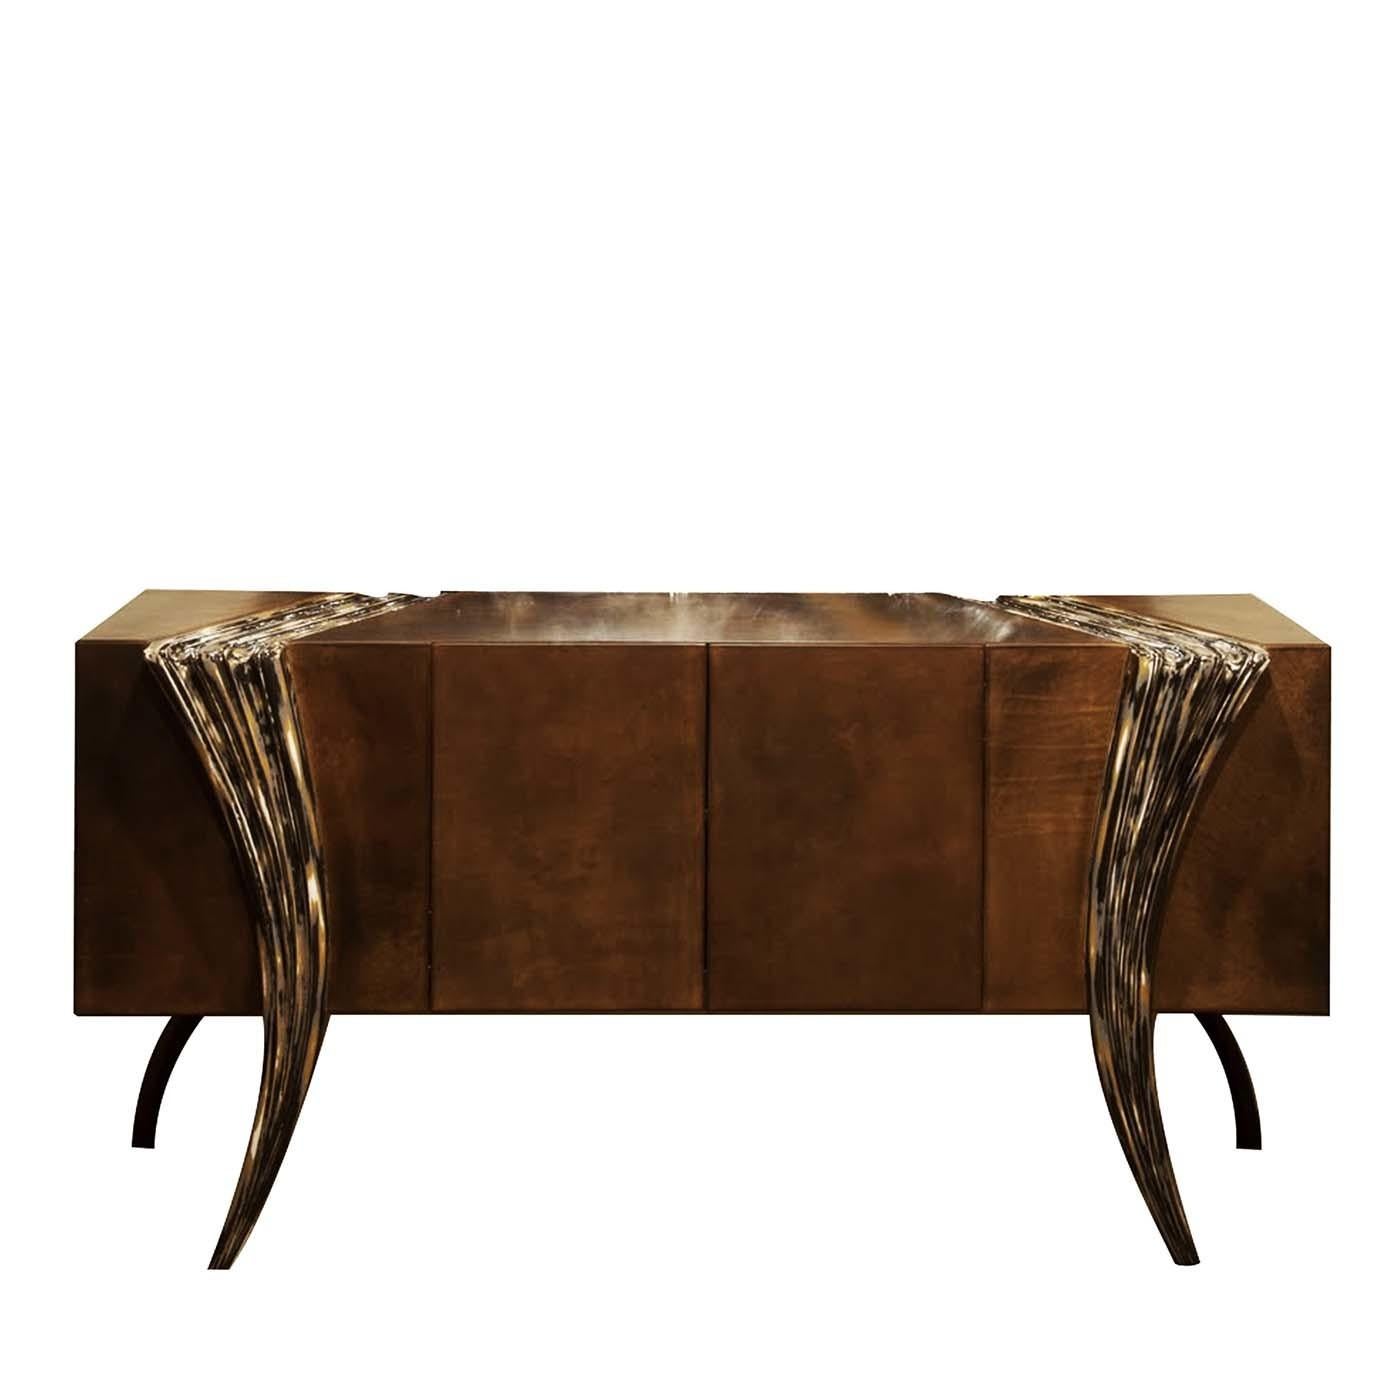 This stunning and versatile sideboard will be a superb addition to an eclectic home, where it will provide a living room, dining room or even entrance with ample storage space, while also imbuing a unique sense of movement that will not go